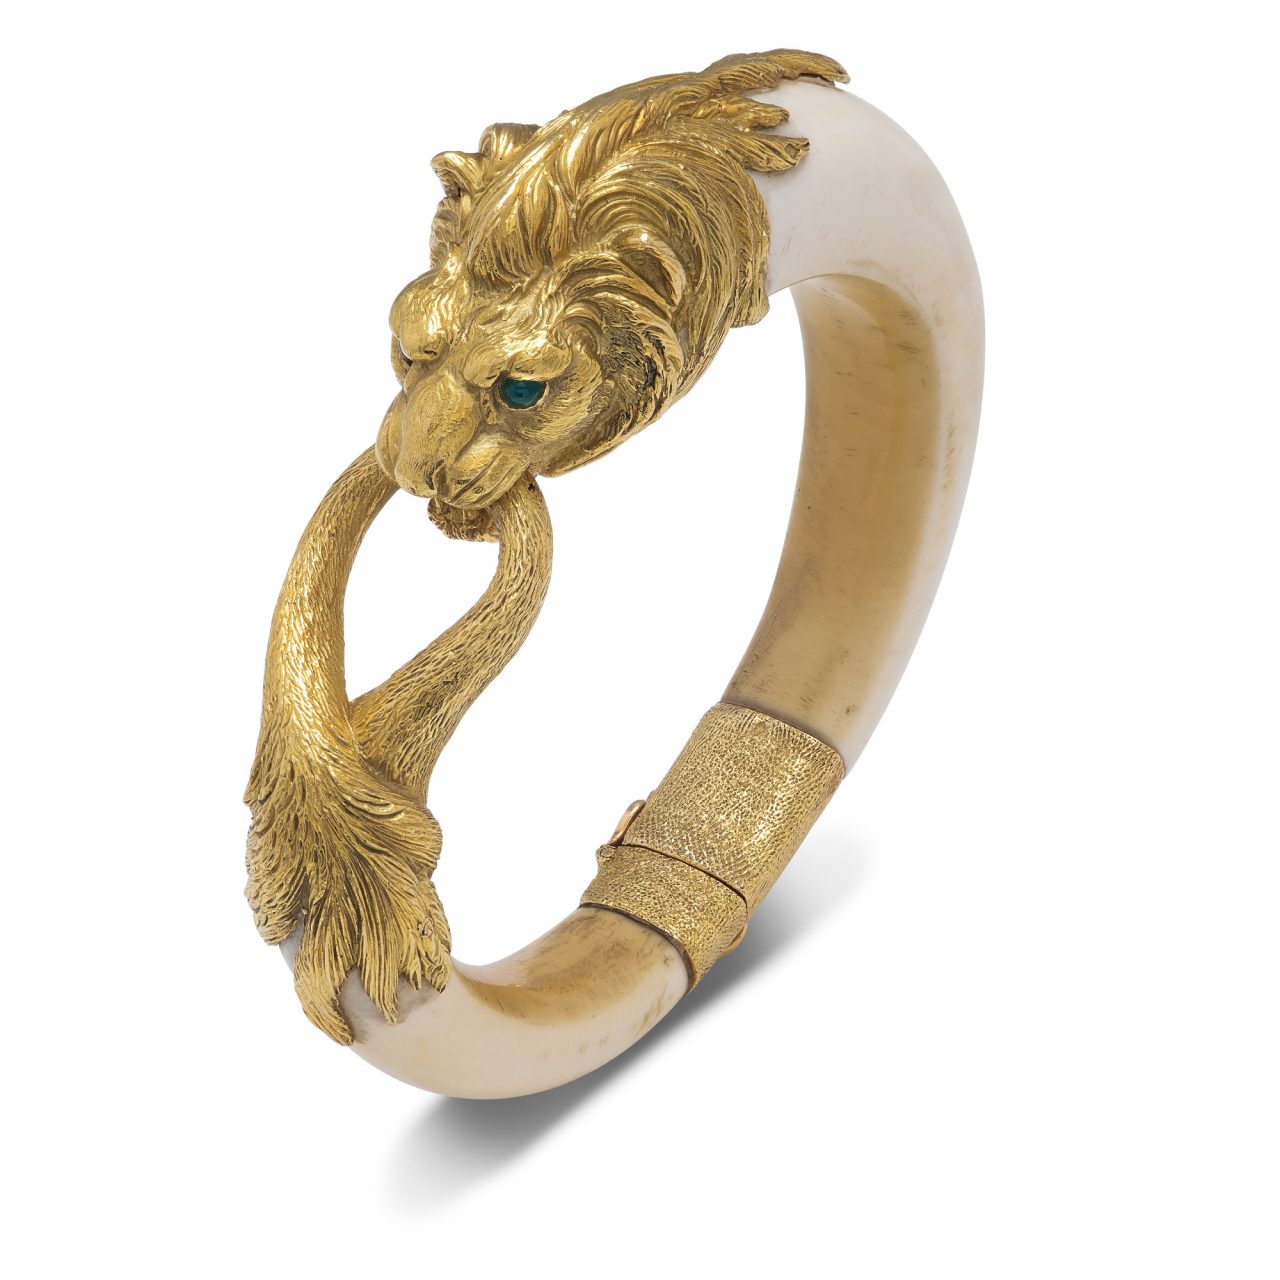 Lion Bracelet in Ivory and 18k Yellow Gold